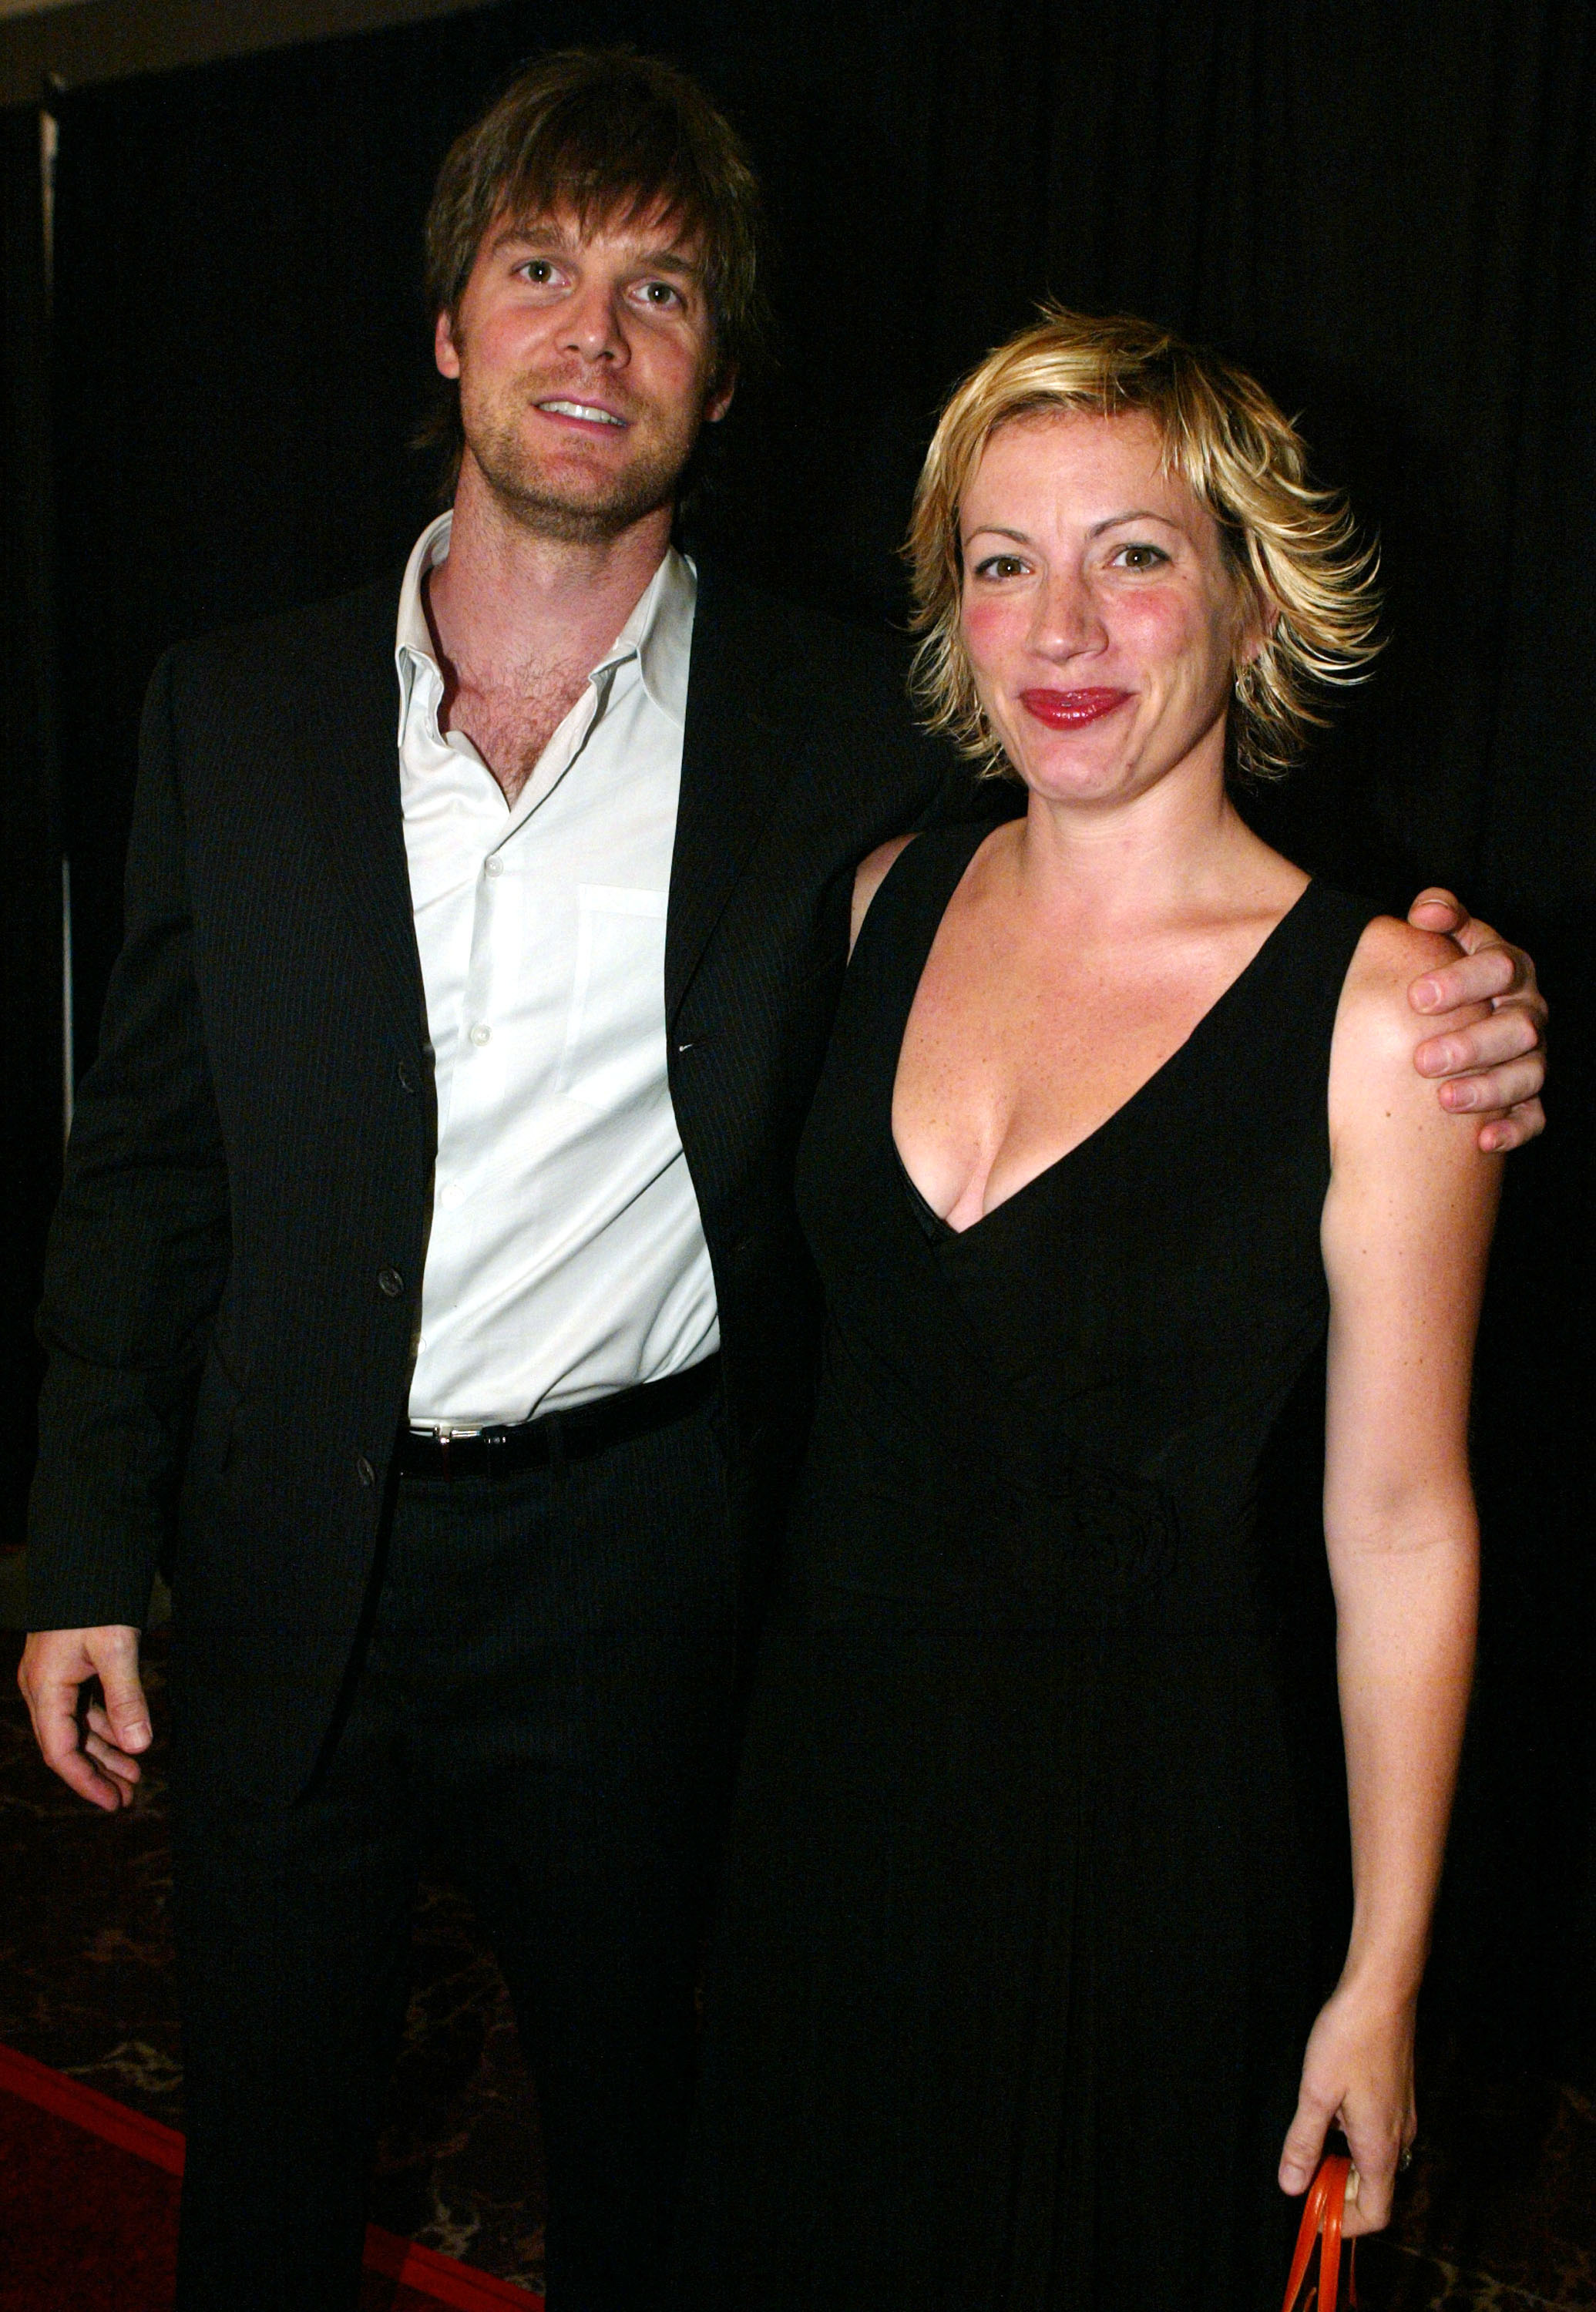 Peter Krause and Christine King during The Lili Claire Foundation's 6th Annual Benefit at The Beverly Hilton Hotel on October 18, 2003, in Beverly Hills, California. | Source: Getty Images